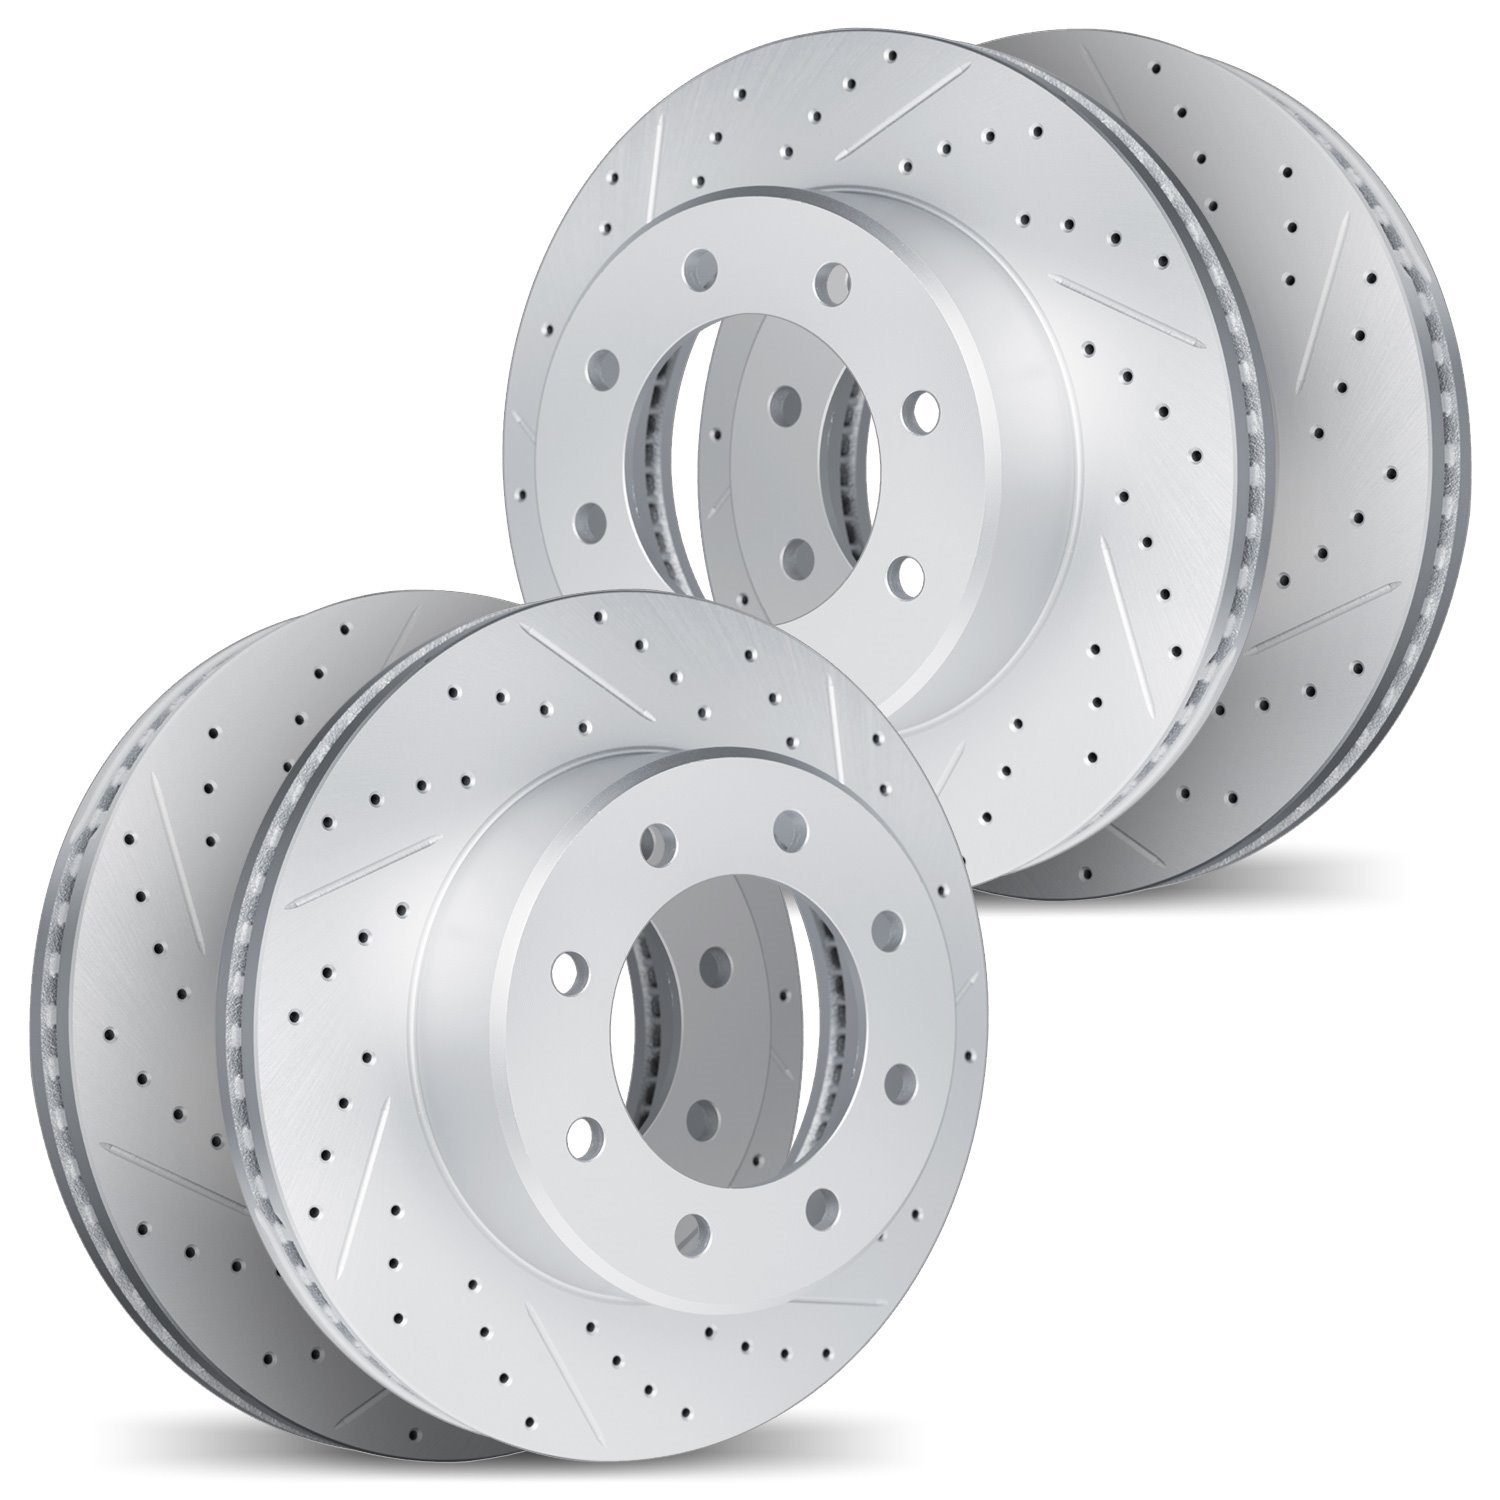 2004-48064 Geoperformance Drilled/Slotted Brake Rotors, Fits Select GM, Position: Front and Rear